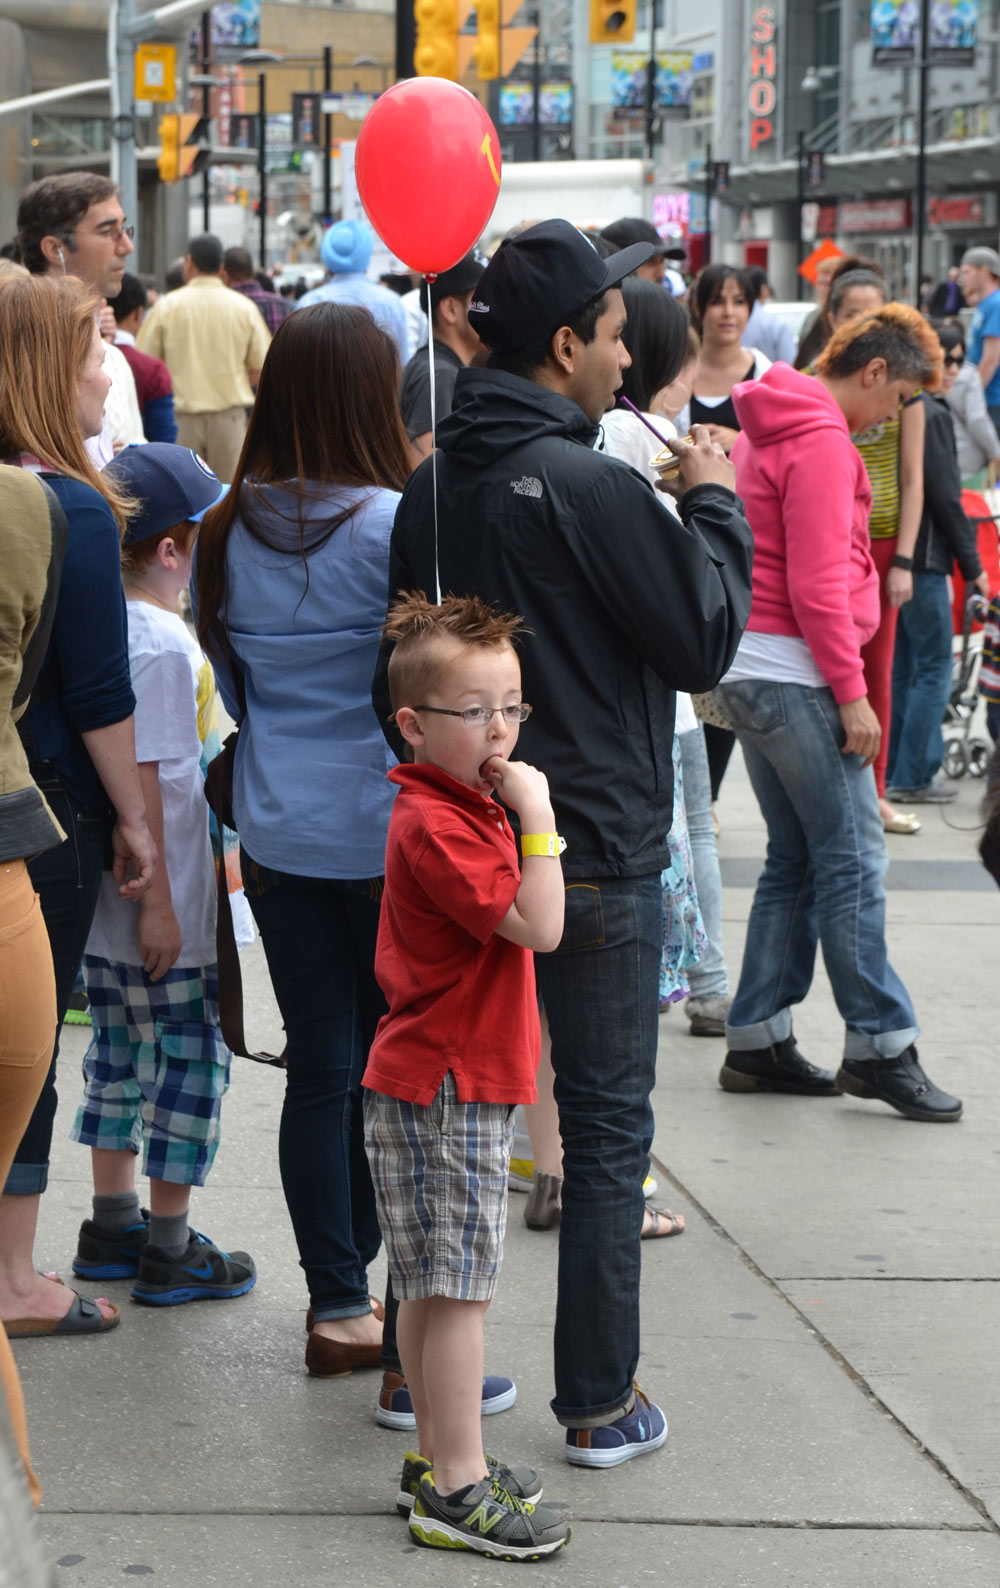 a young boy, standing in a crowd and hold a red balloon on a string